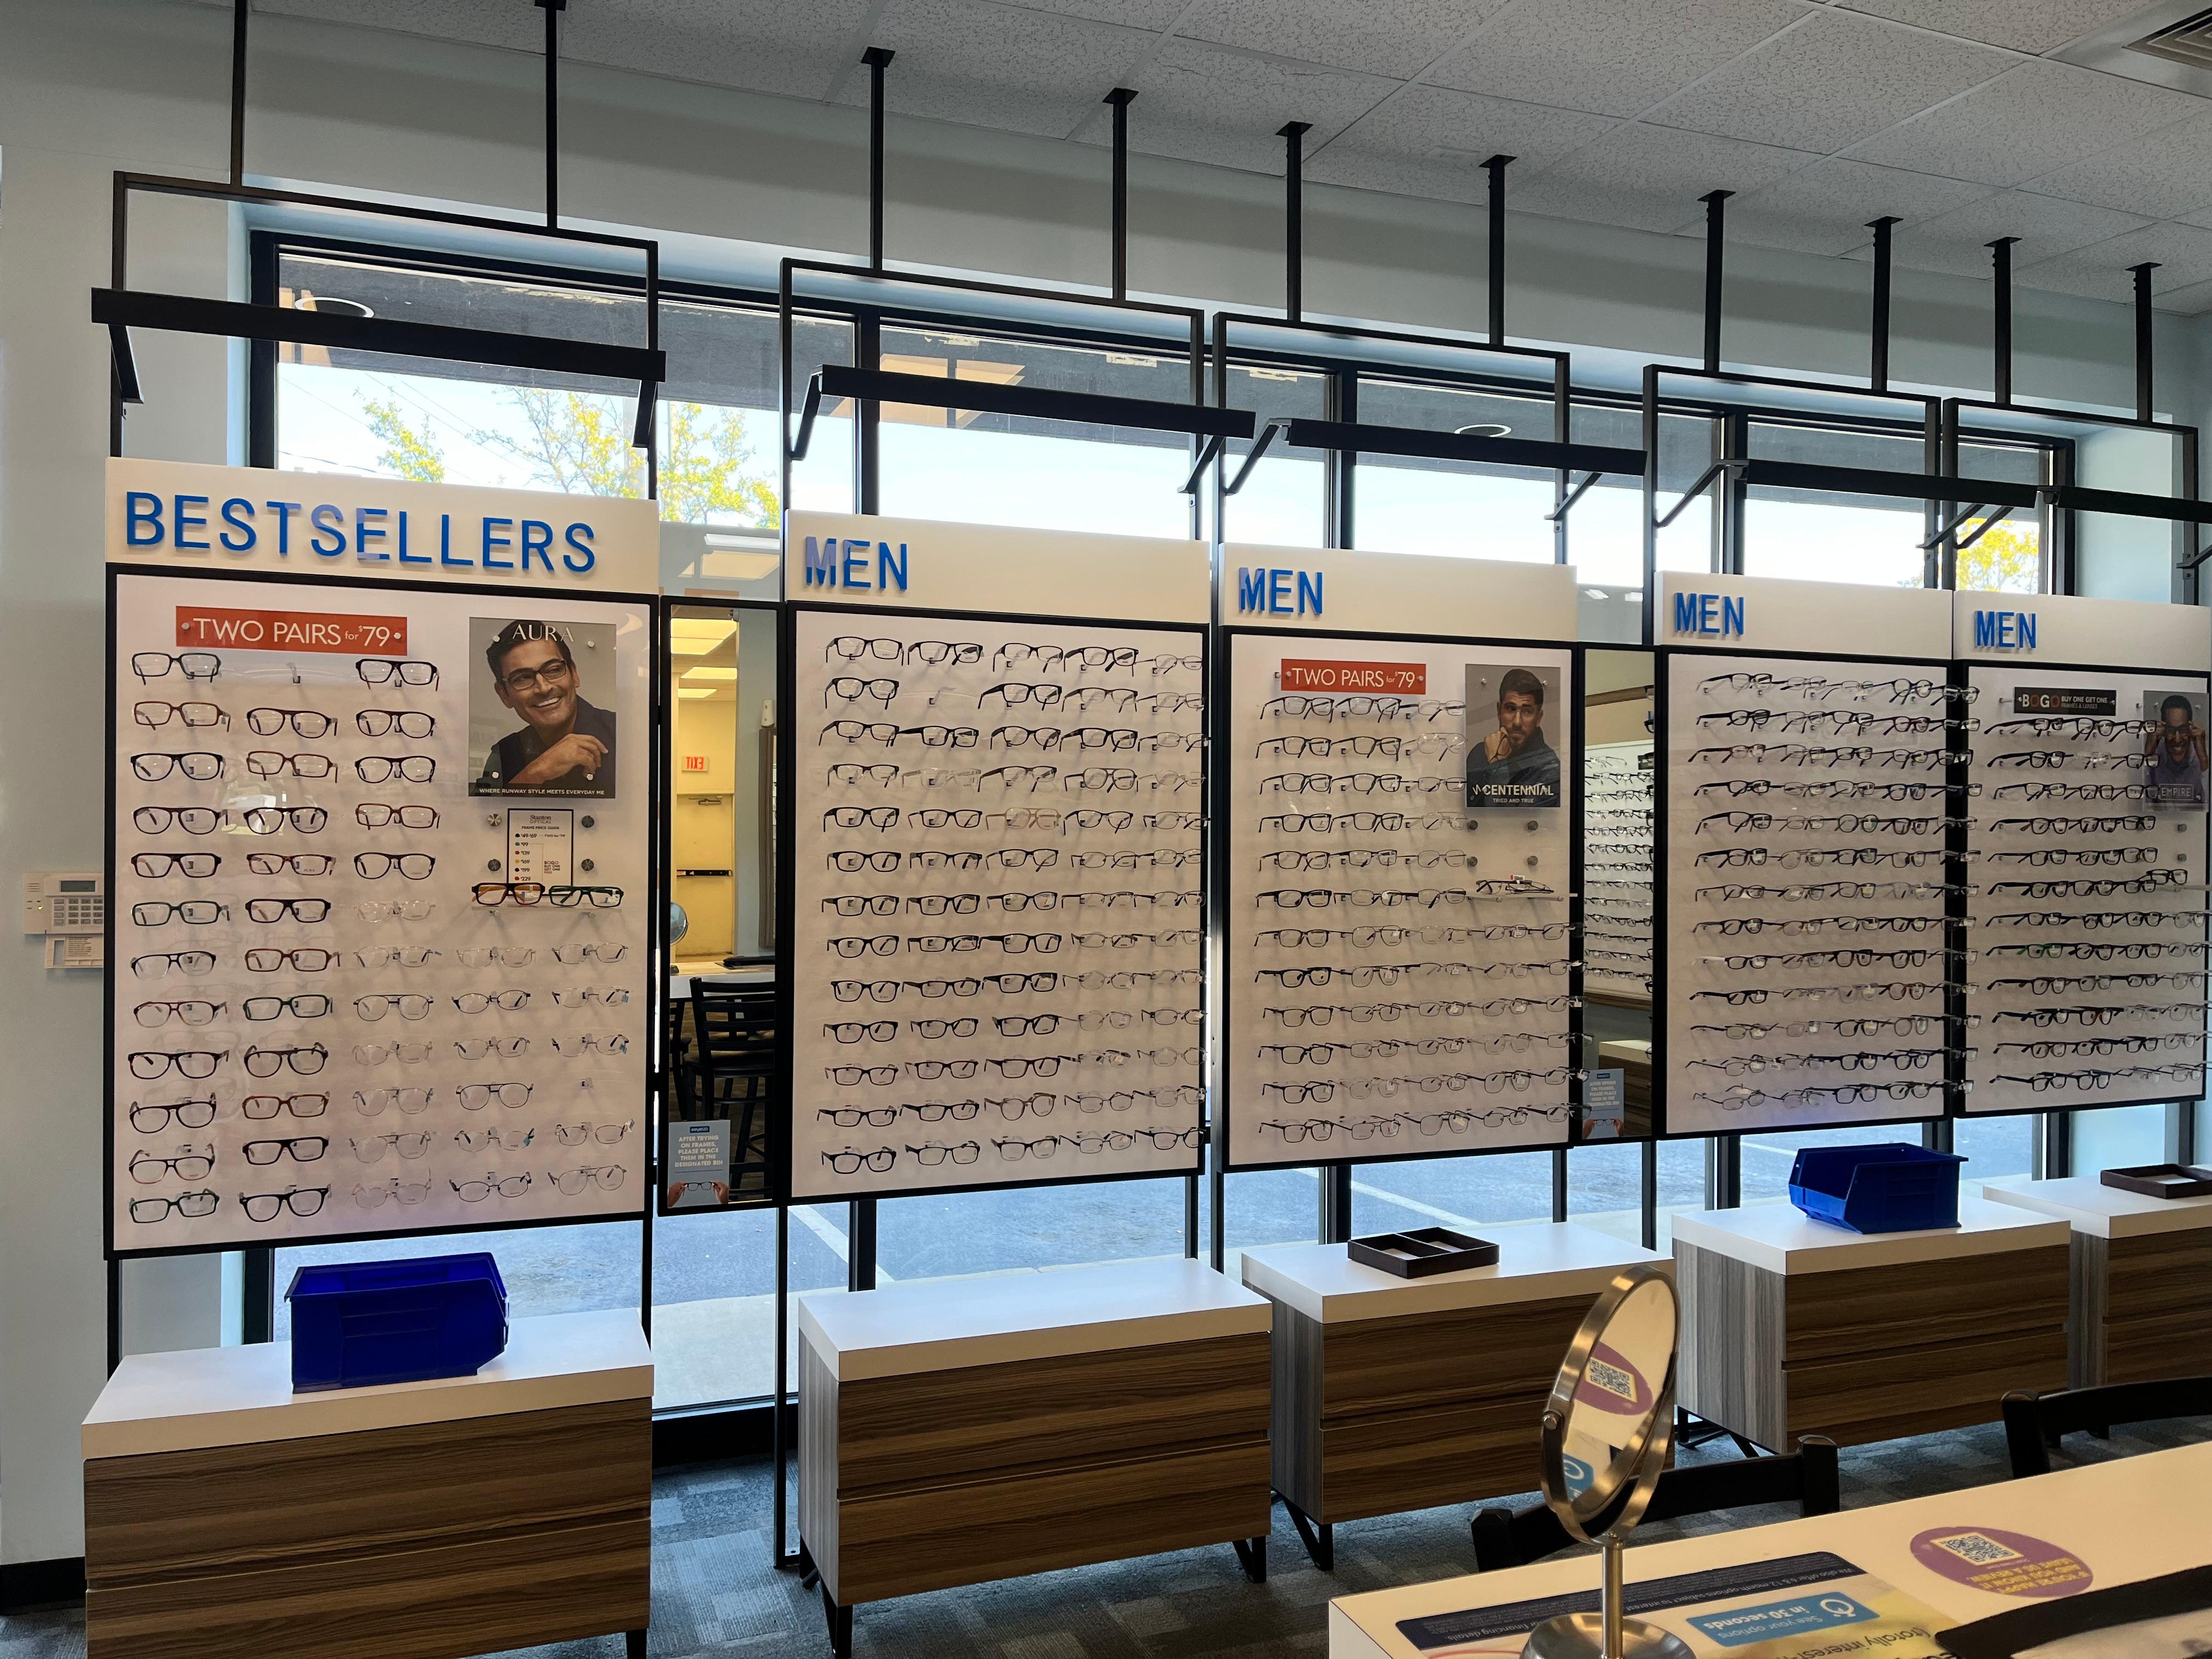 Eyeglasses for Sale at Stanton Optical store in South Charlotte, NC 28217